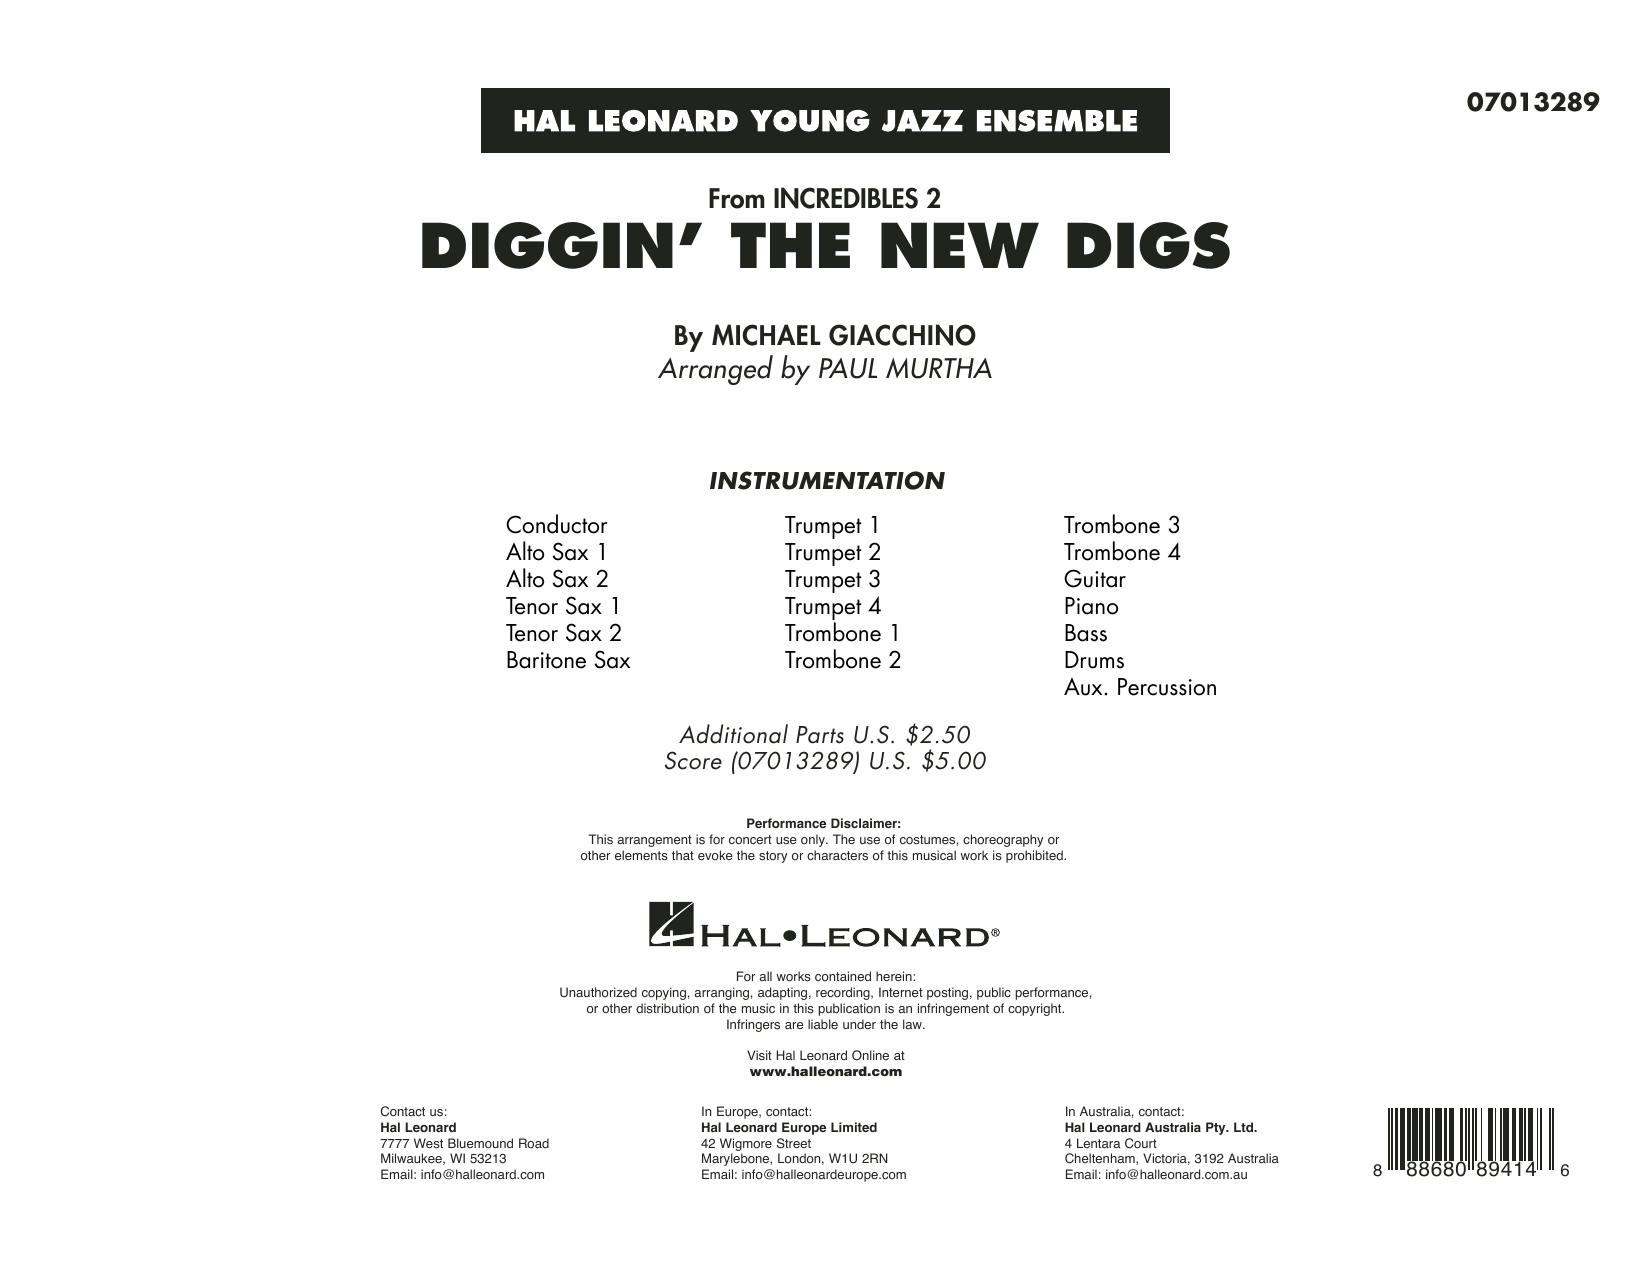 Download Michael Giacchino Diggin' the New Digs (from Incredibles Sheet Music